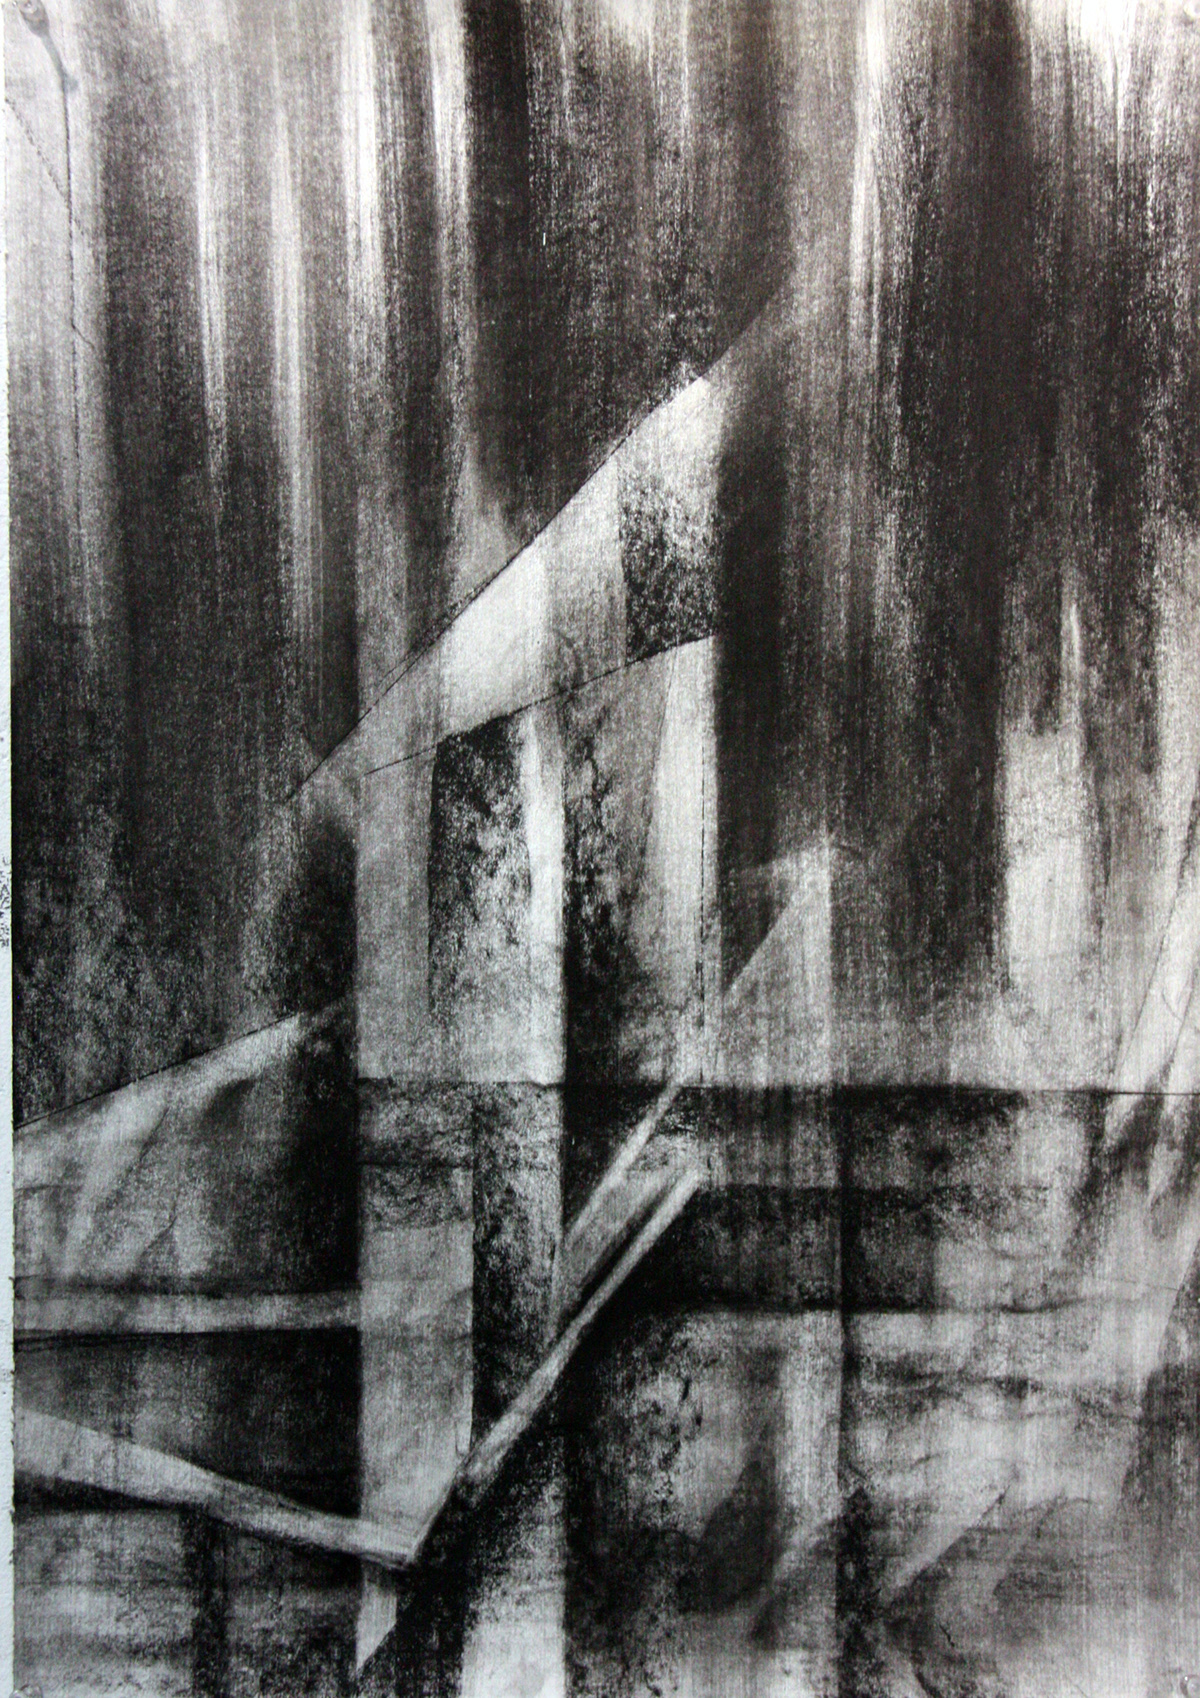 Foundation Year Tom Mills conte charcoal series risd